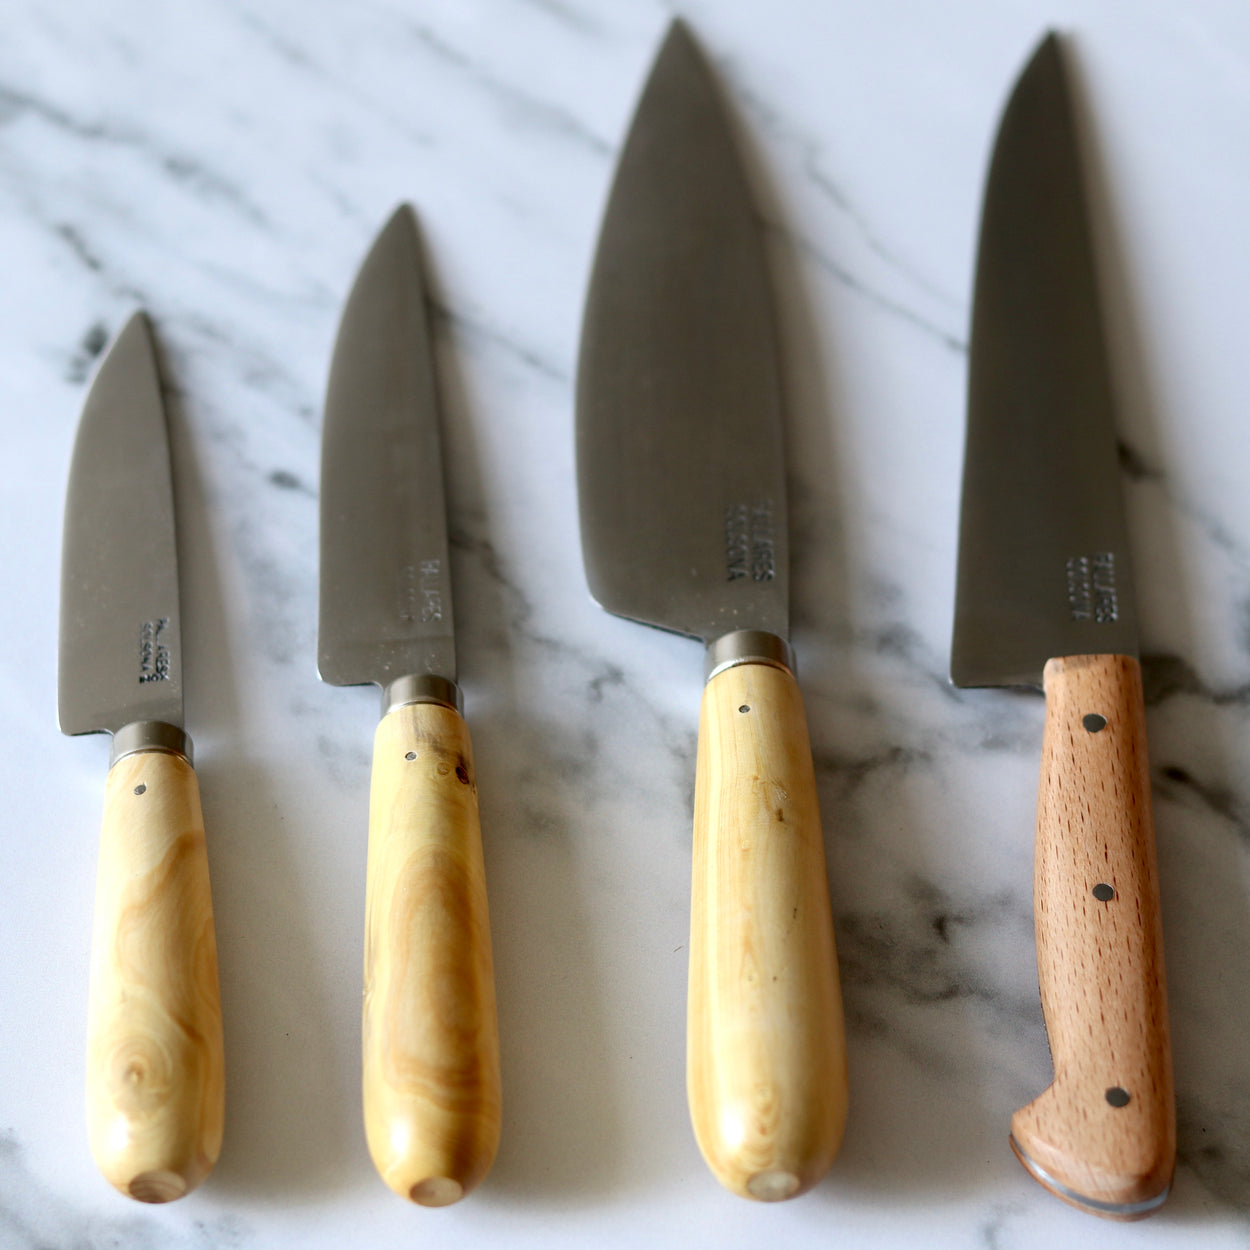 A group of 4 Pallares Solsona Box Wood Carbon Steel Kitchen Knives